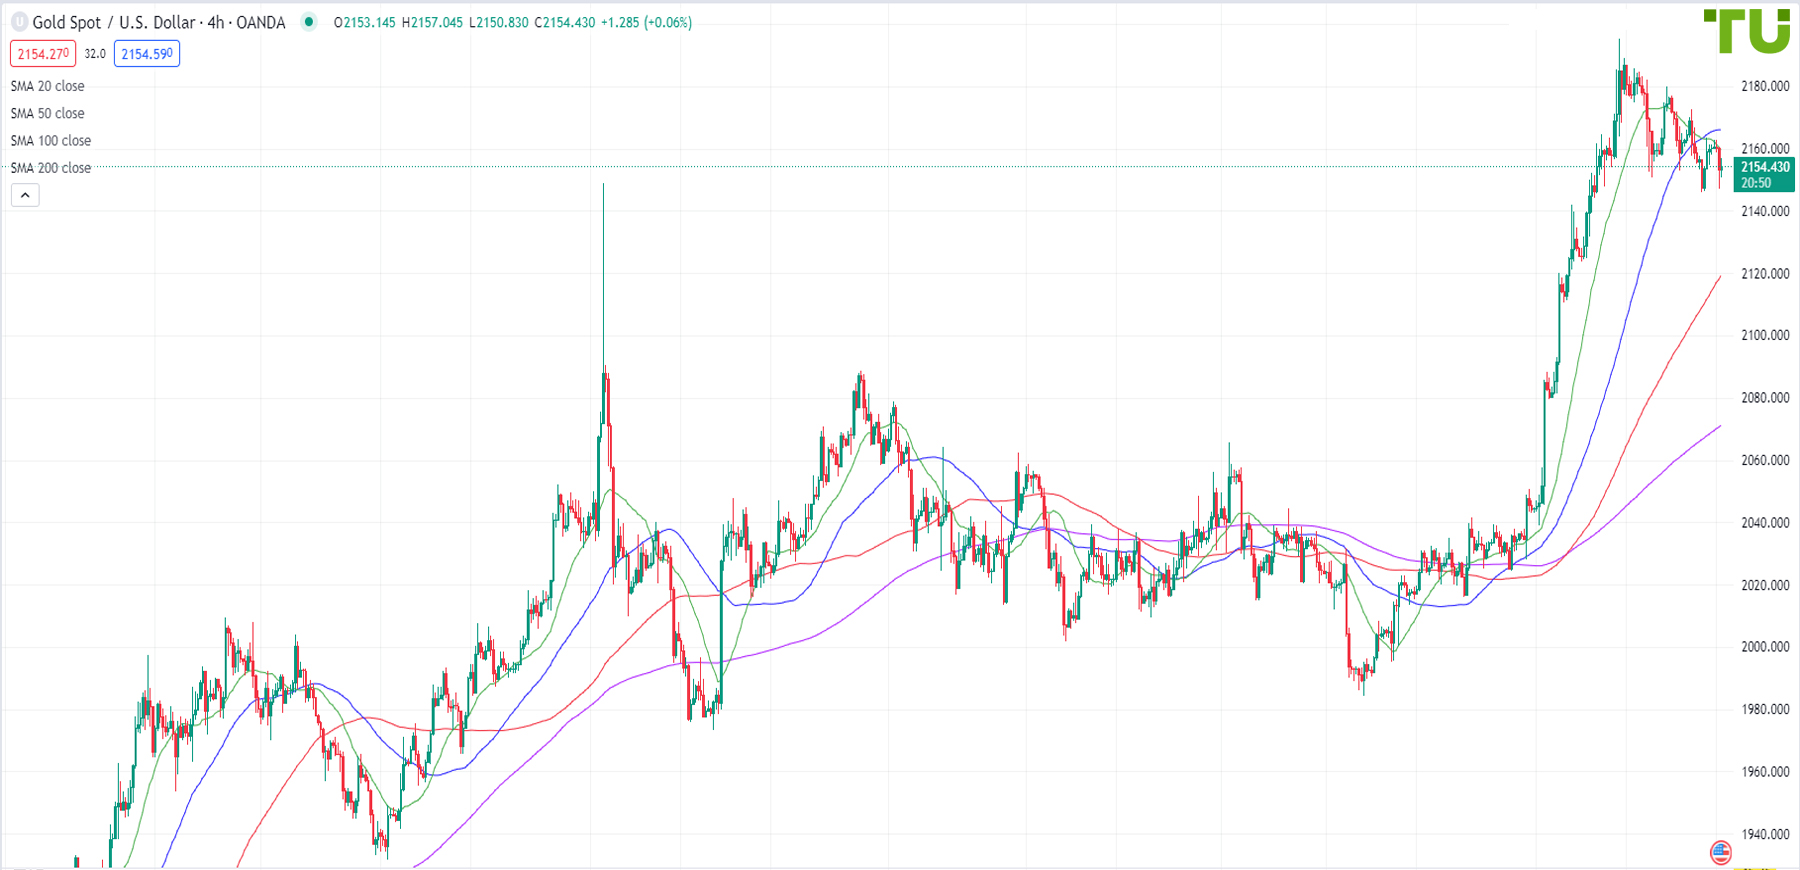 XAU/USD is consolidating in a narrow range